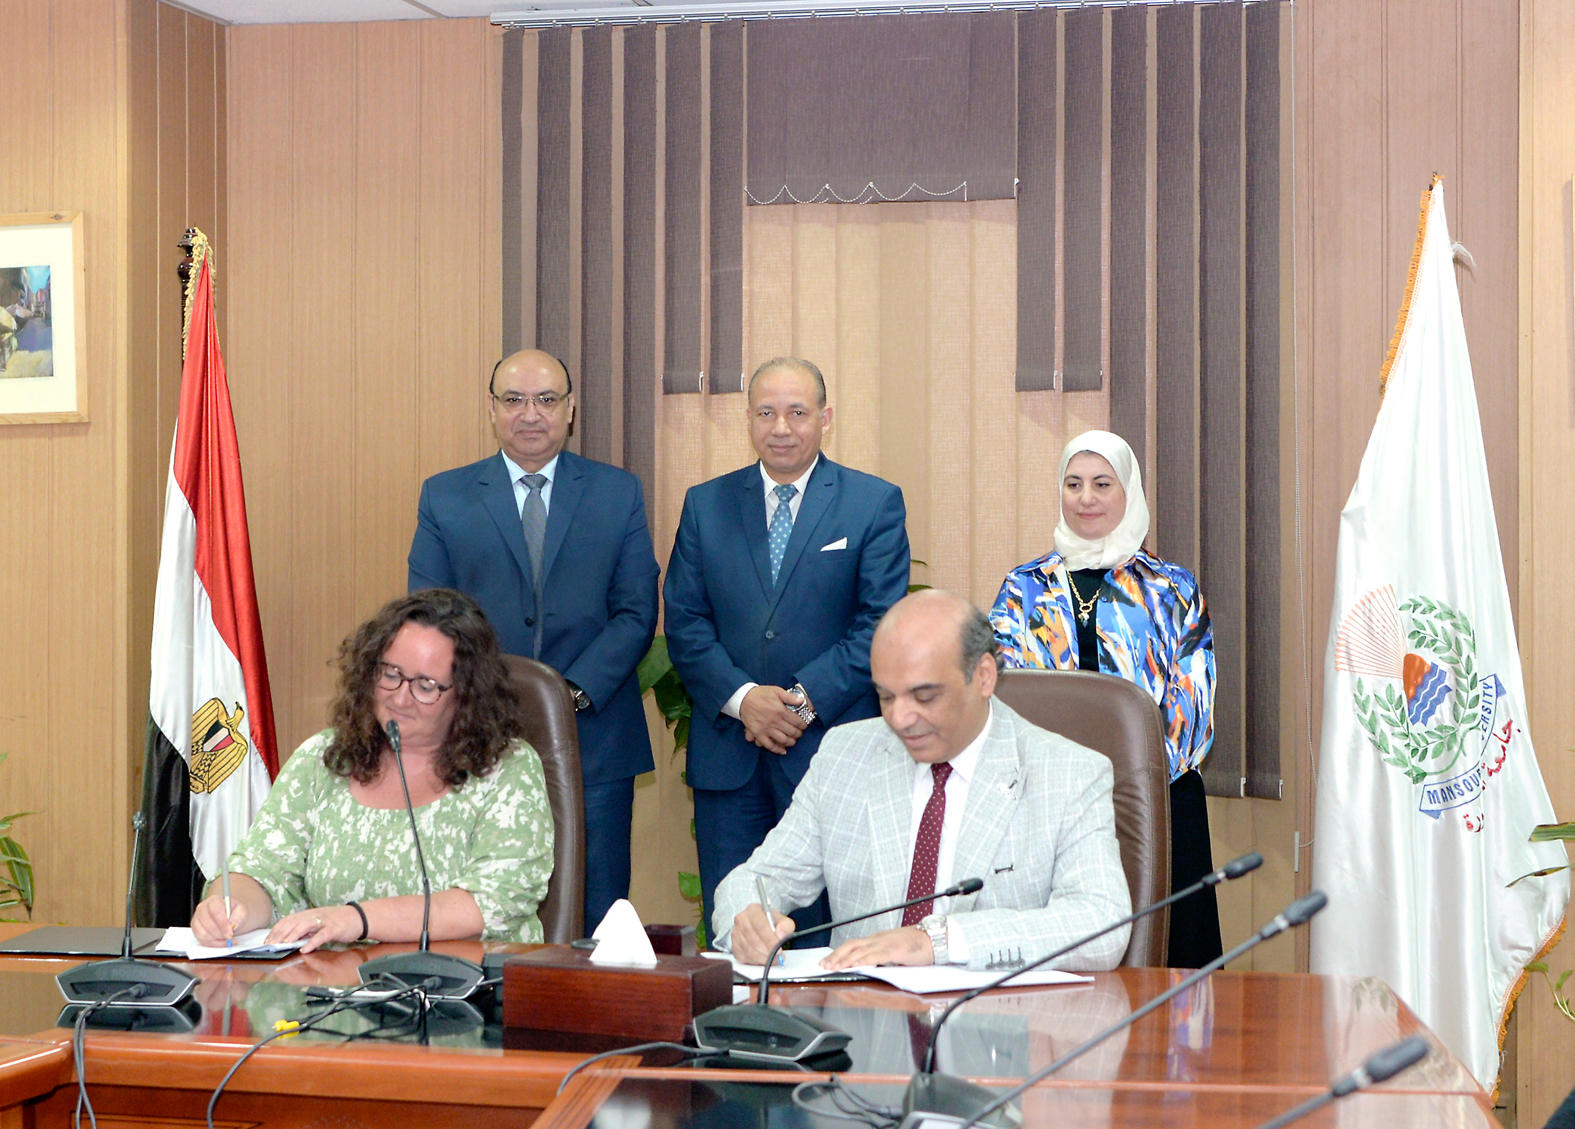 Renewing a partnership contract between Mansoura University and Manchester University for medical education